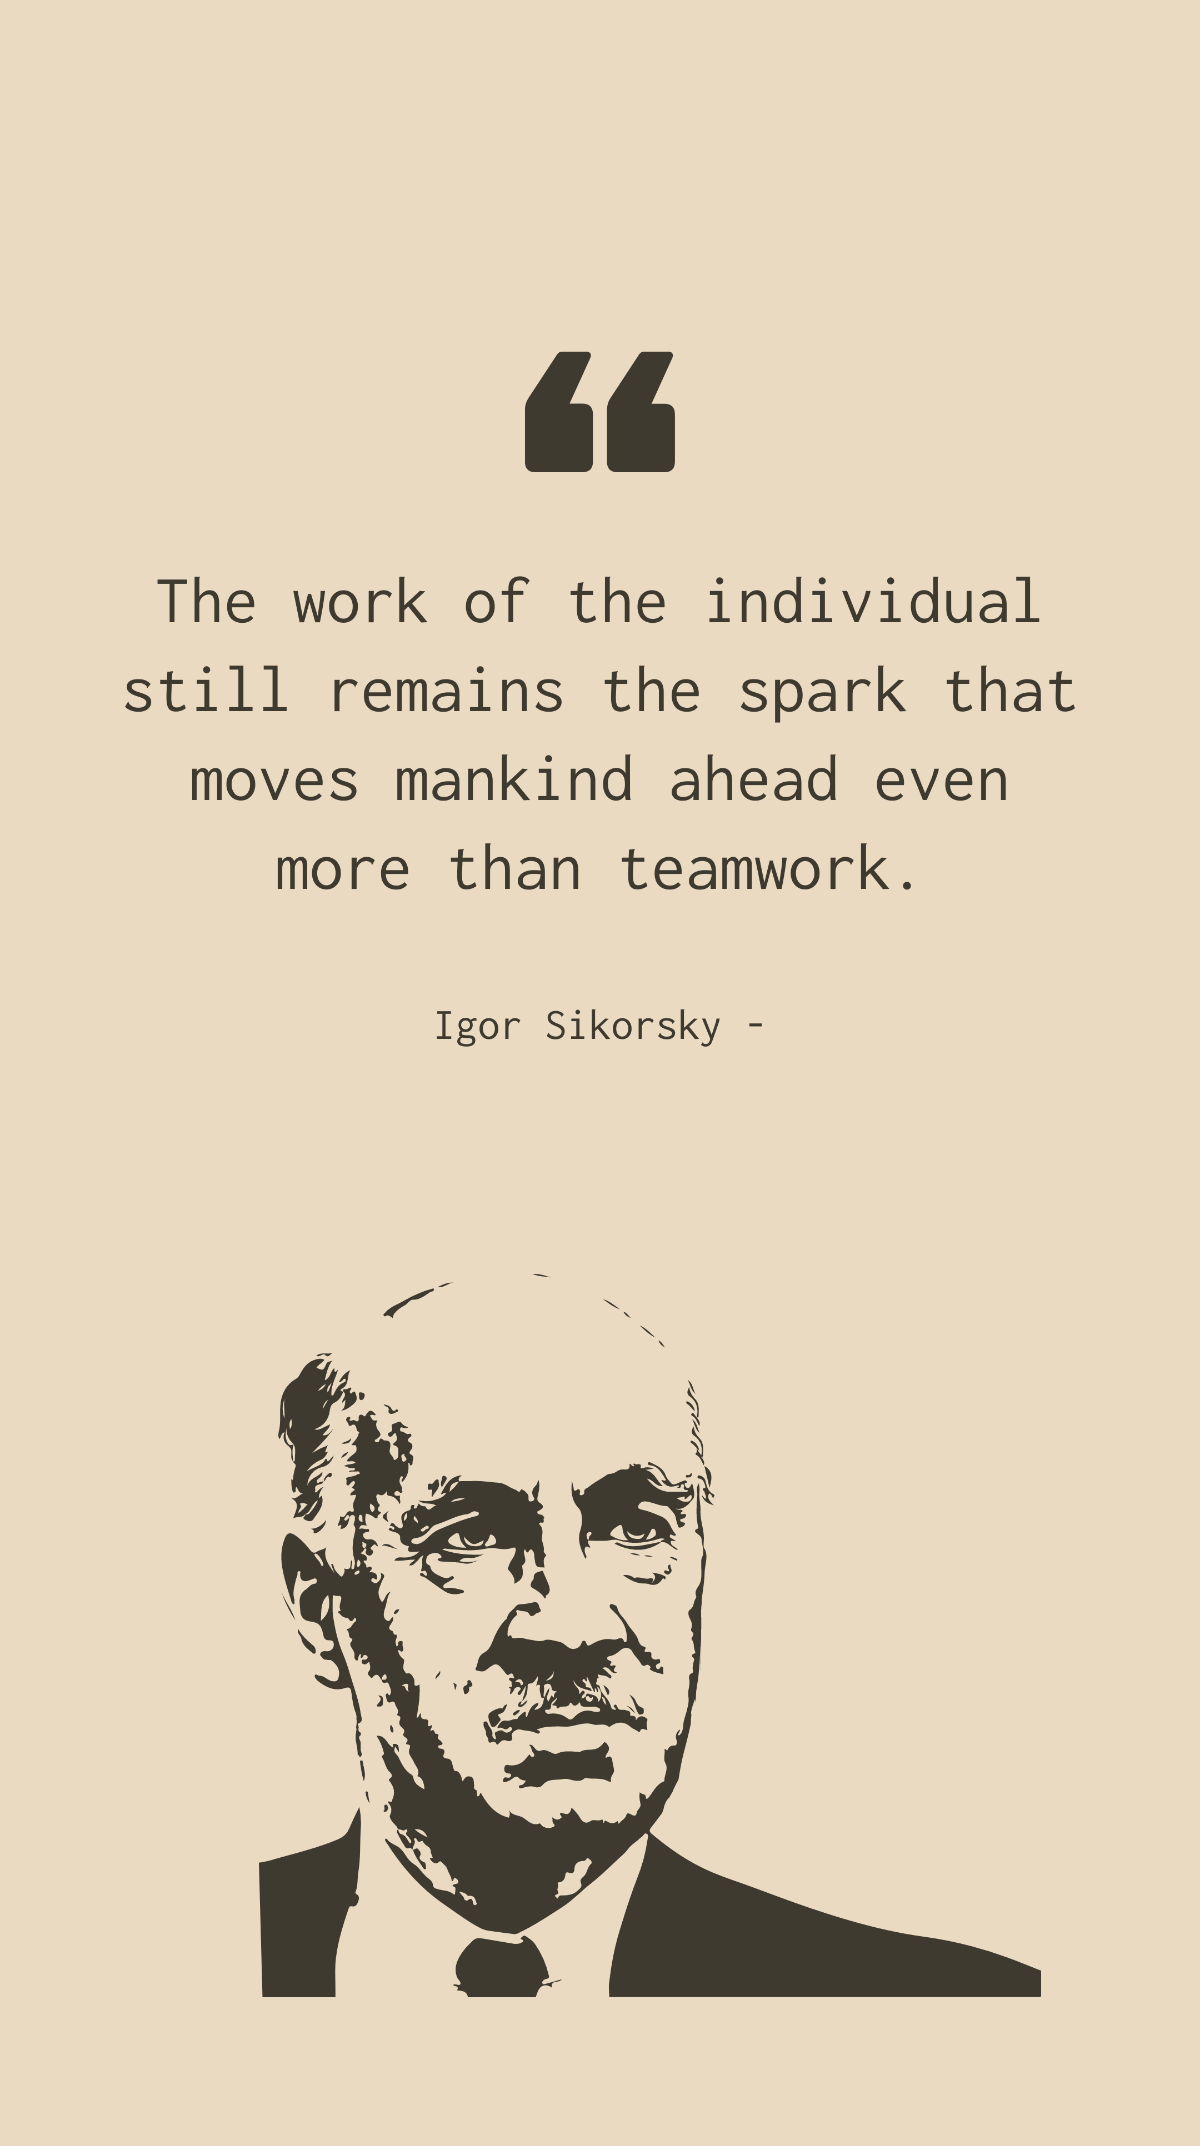 Igor Sikorsky - The work of the individual still remains the spark that moves mankind ahead even more than teamwork. Template